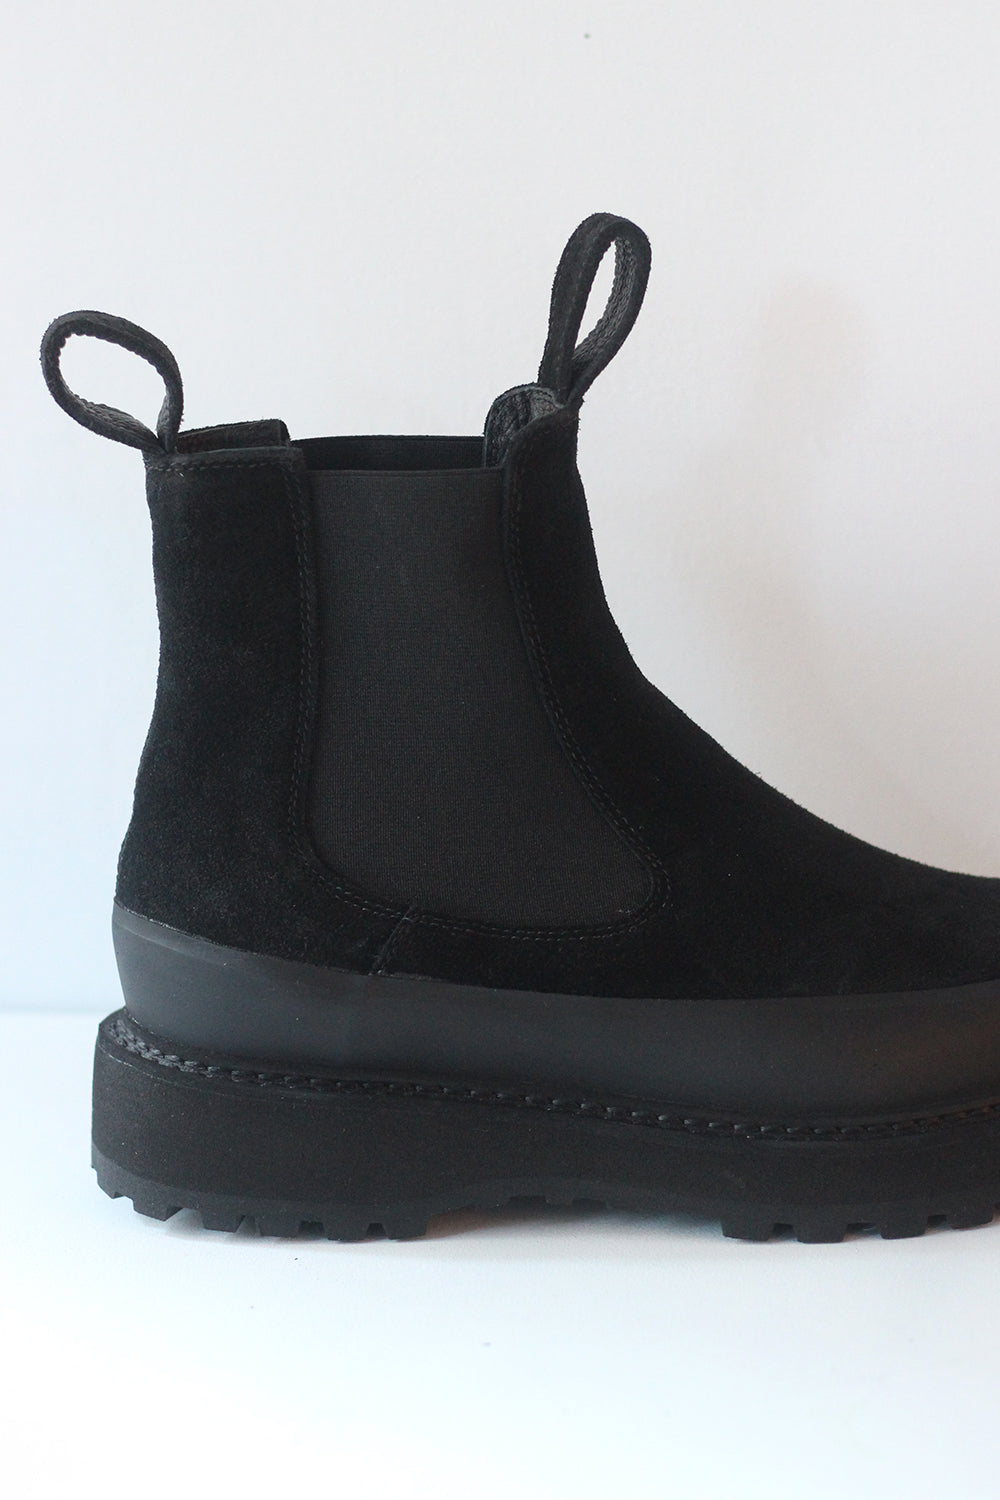 WRYHT "SIDE GORE COUNTRY BOOTS" (black suede)